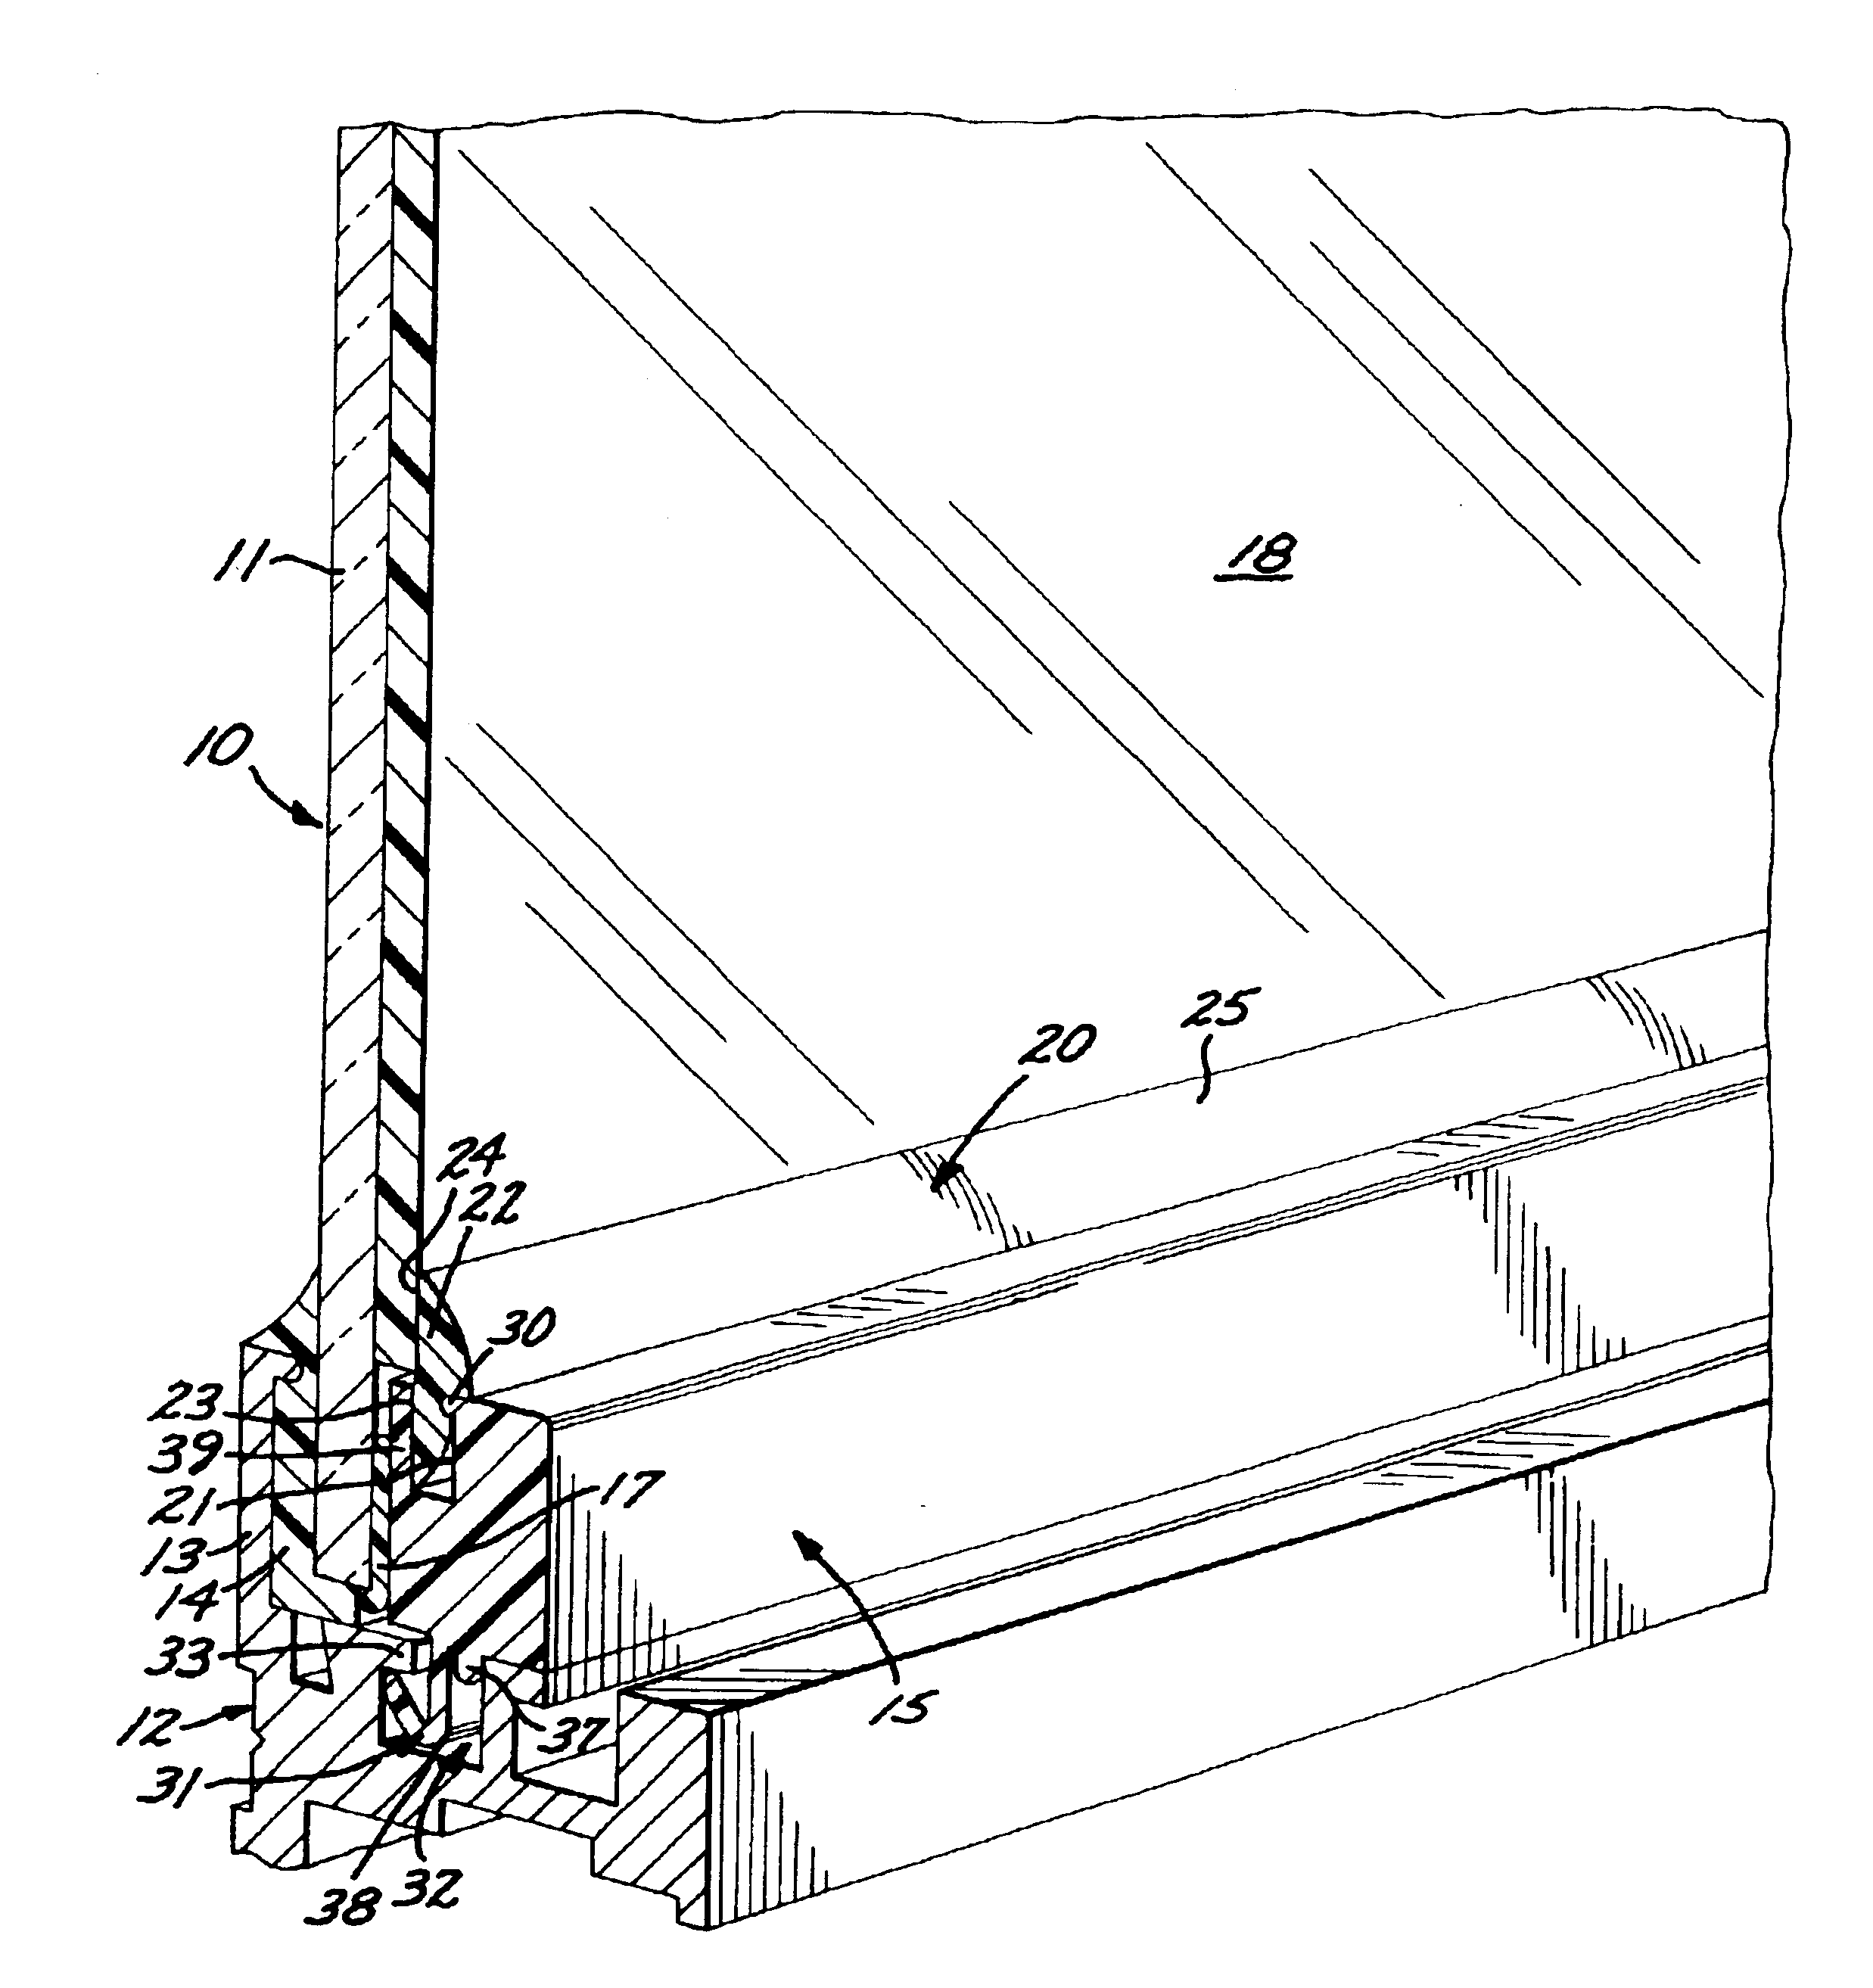 Window assembly